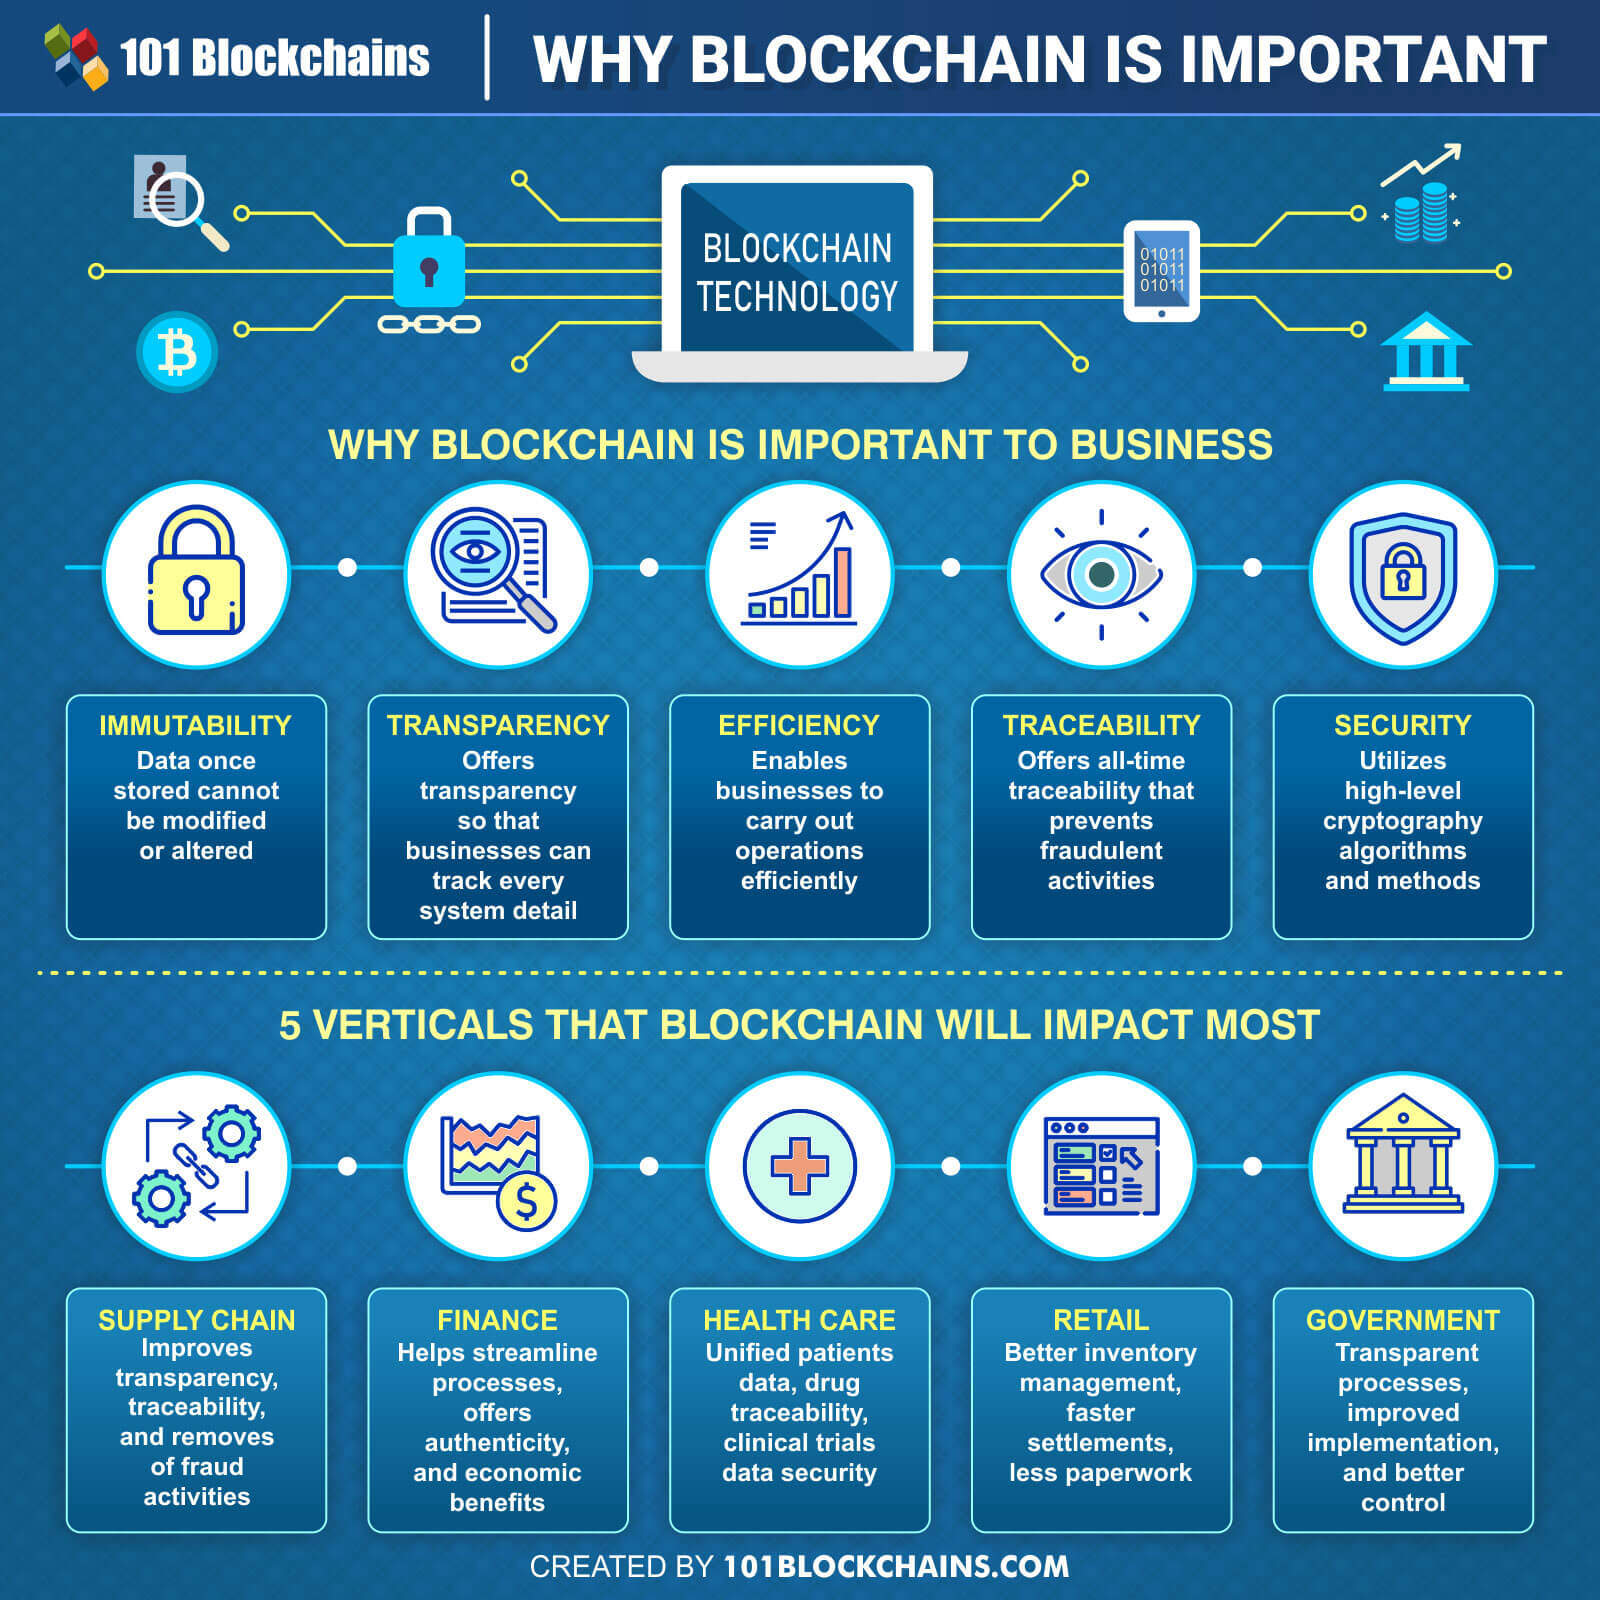 Why Blockchain is important